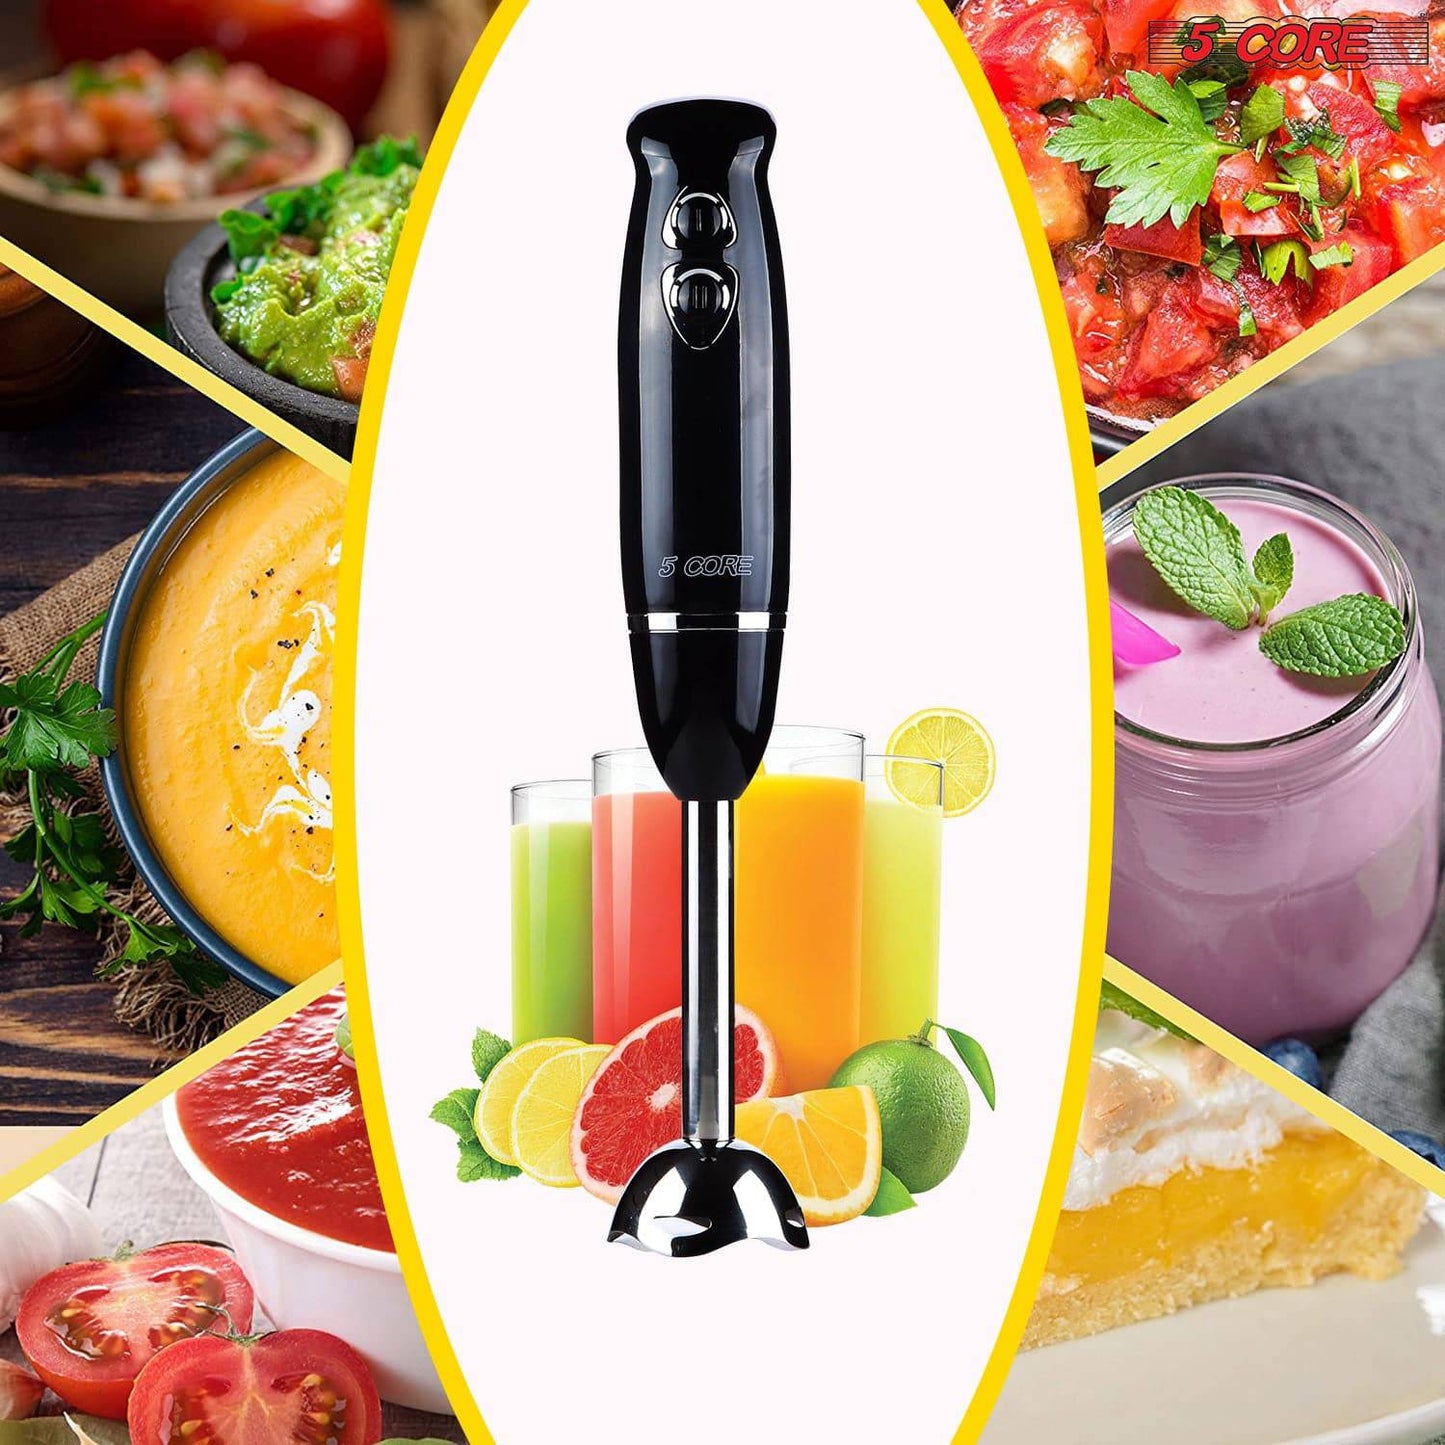 https://aestheticambiancellc.com/cdn/shop/files/5-core-kitchen-appliances-immersion-blender-handheld-electric-mixer-stainless-steel-with-titanium-blades-5-core-hb-1510-blk-37457428250861.jpg?v=1688844198&width=1445